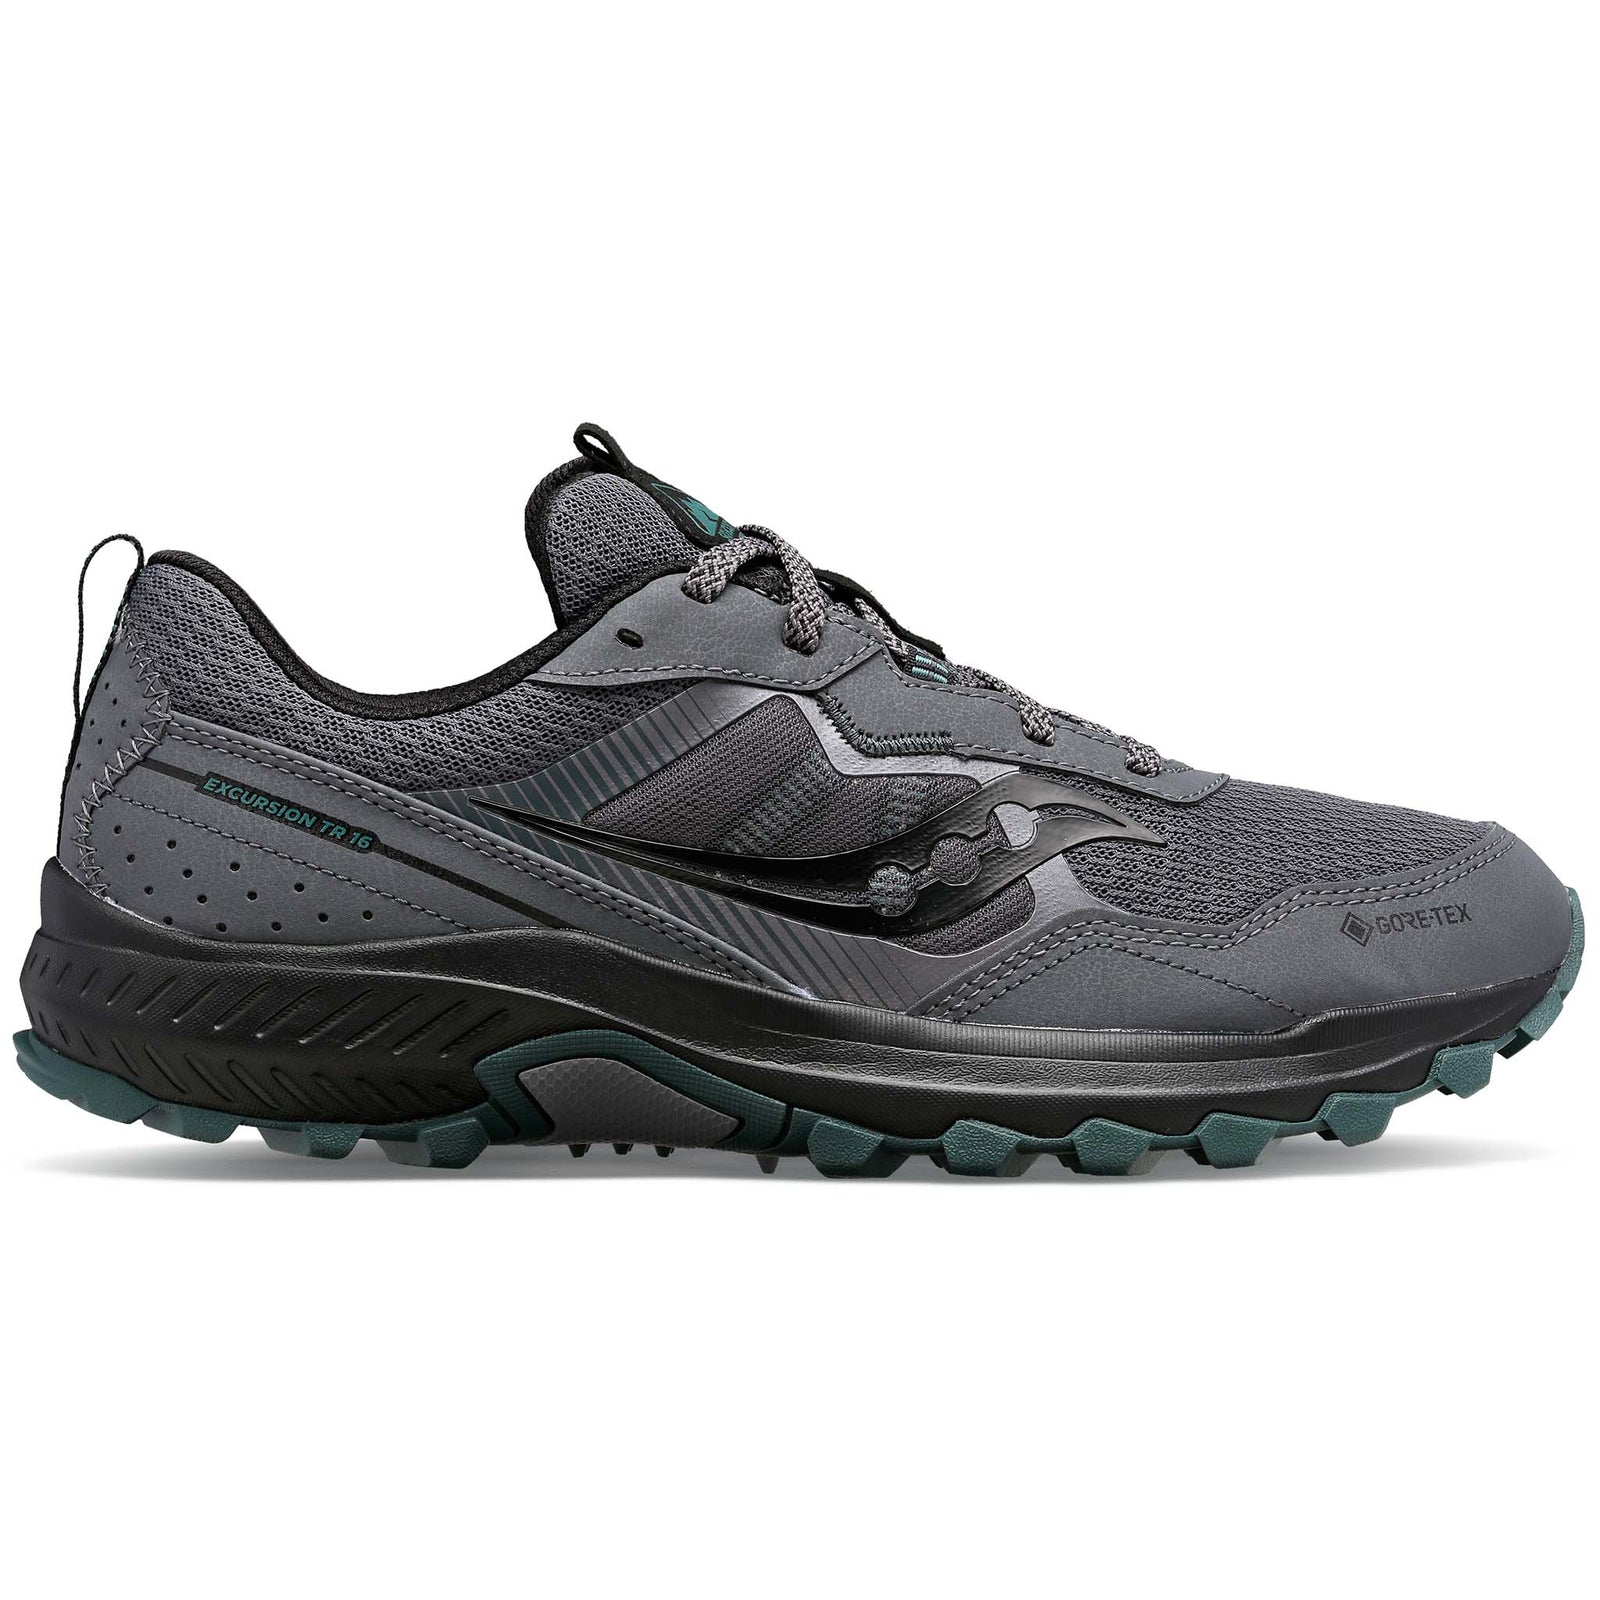 Brooks Puregrit 6 trail running shoes for men